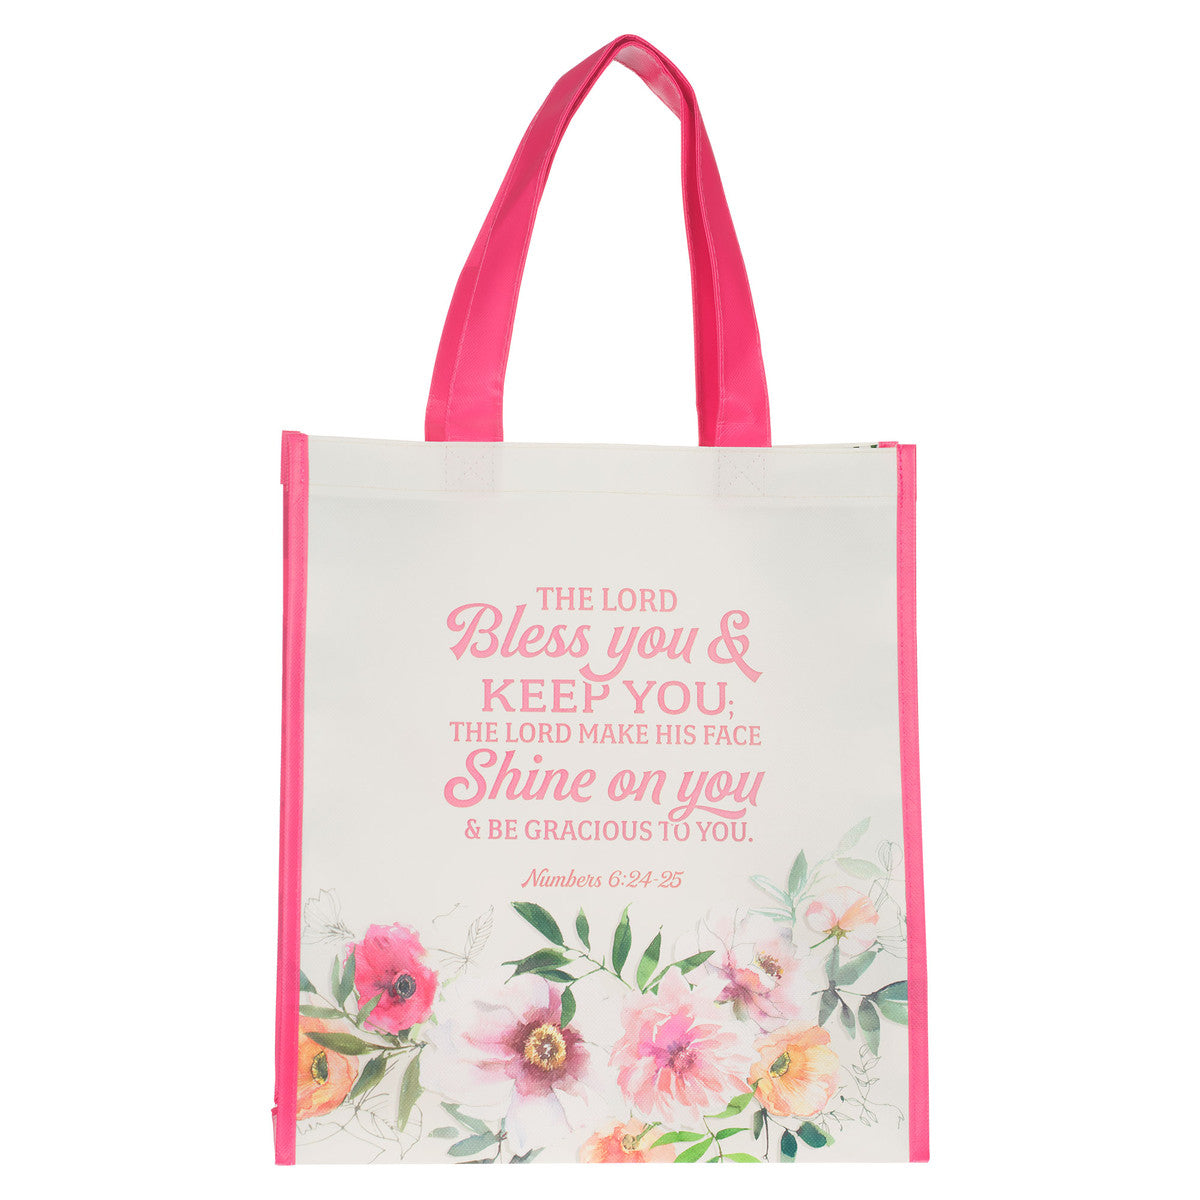 Bless You Tote, Pink & White Floral | Christian Art Gifts